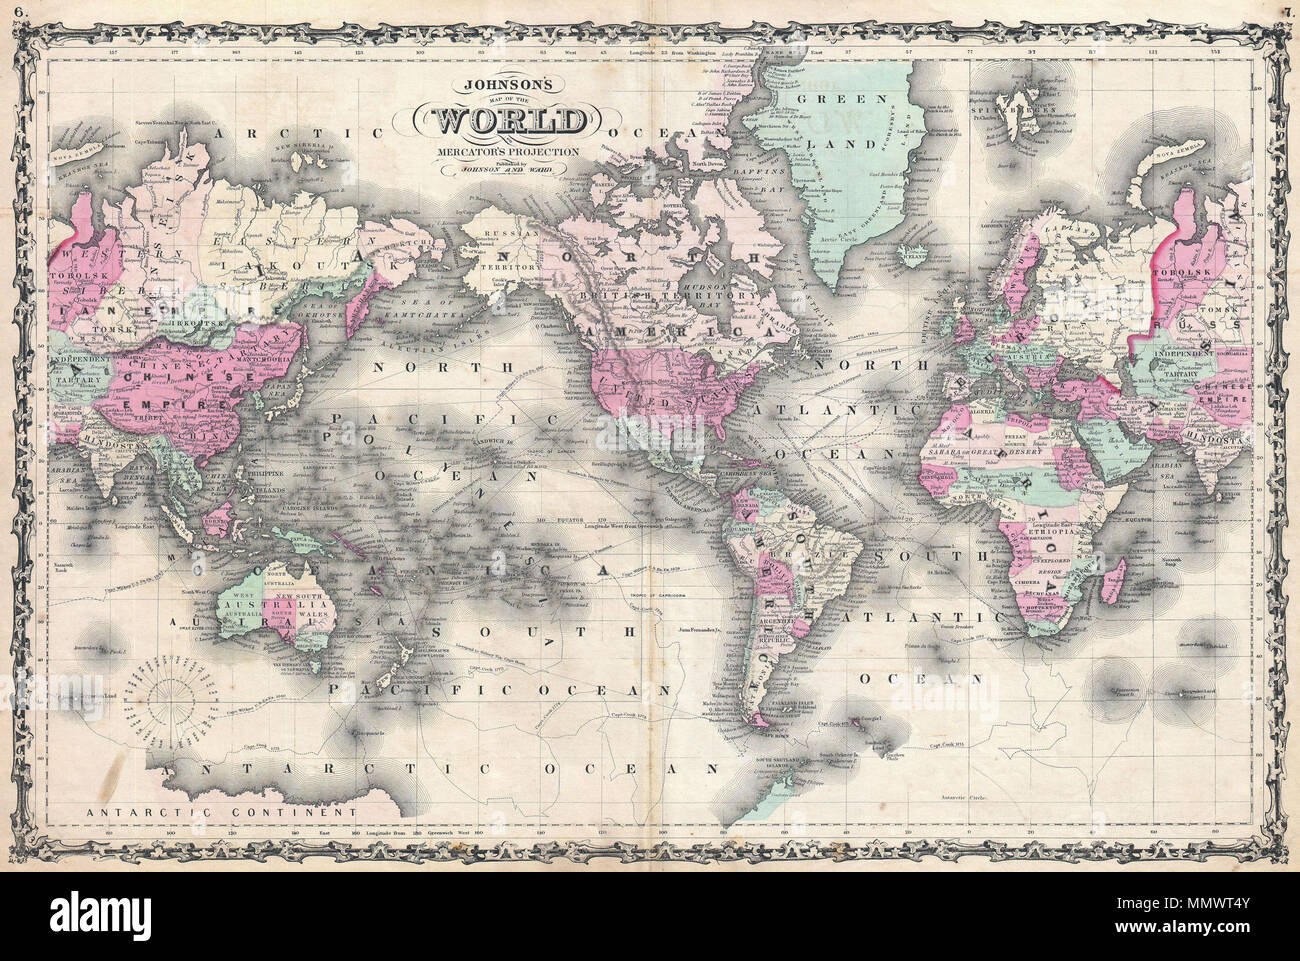 .  English: This is A. J. Johnson’s fine 1862 map of the world on Mercator’s Projection. Depicts the entire world centered on North and South America. Offers a fascinating snapshot of the world during a period of rapid globalization and discovery. Africa is largely “unexplored” and both Lake Victoria and Lake Tanganyika have yet to appear. The Antarctic continent is shown only sketchily, representing the relatively primitive state of Antarctic exploration in 1862. Shows the path of important explorers including Cook and Wilkes. Also notes several ship routes between America and Europe as well  Stock Photo